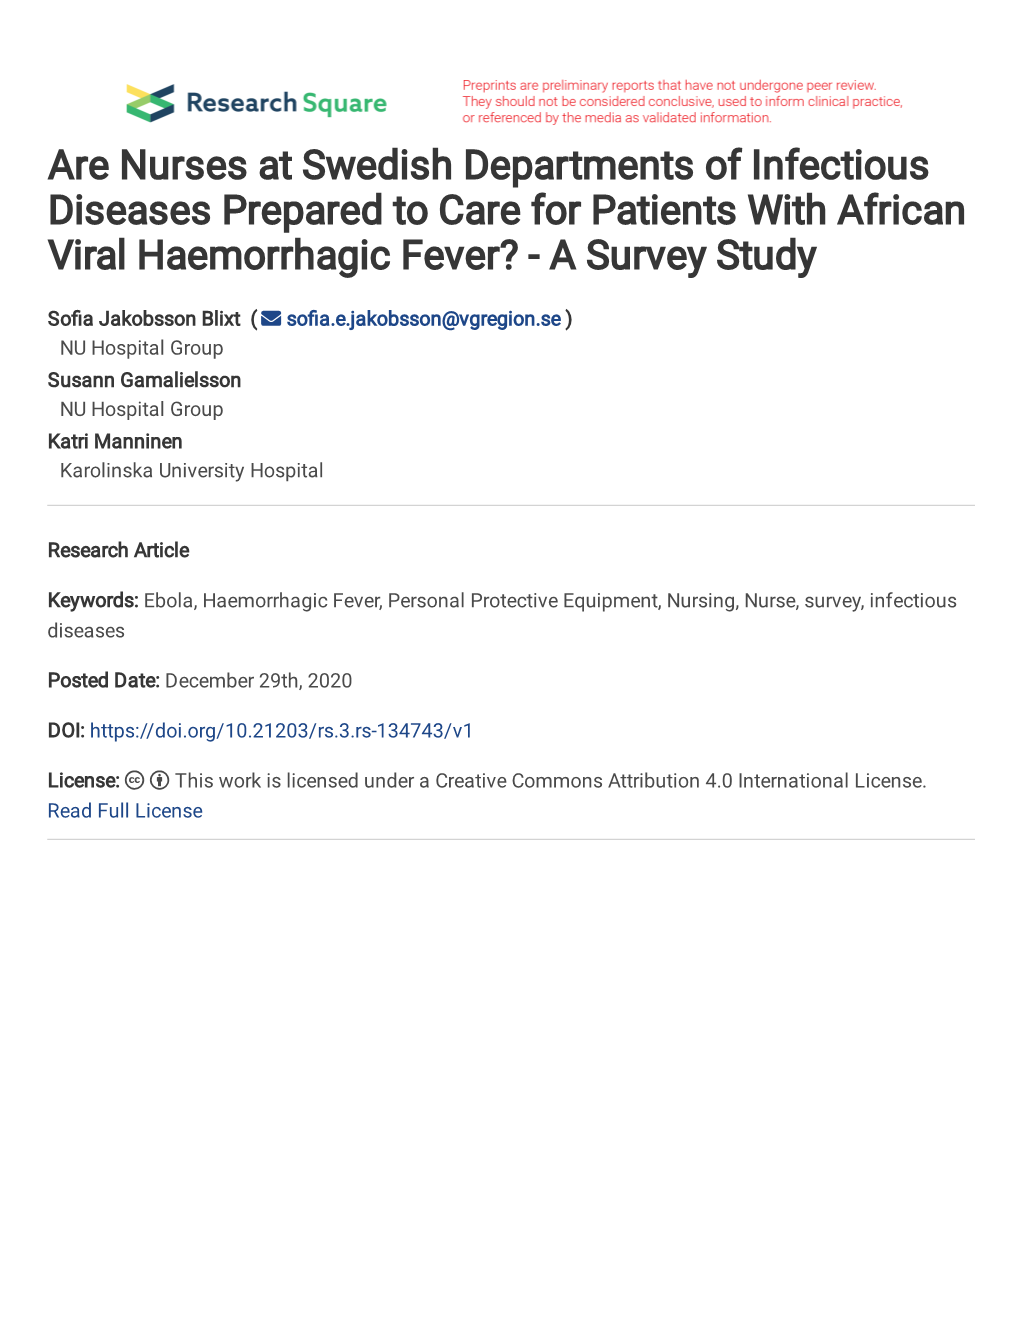 Are Nurses at Swedish Departments of Infectious Diseases Prepared to Care for Patients with African Viral Haemorrhagic Fever? - a Survey Study